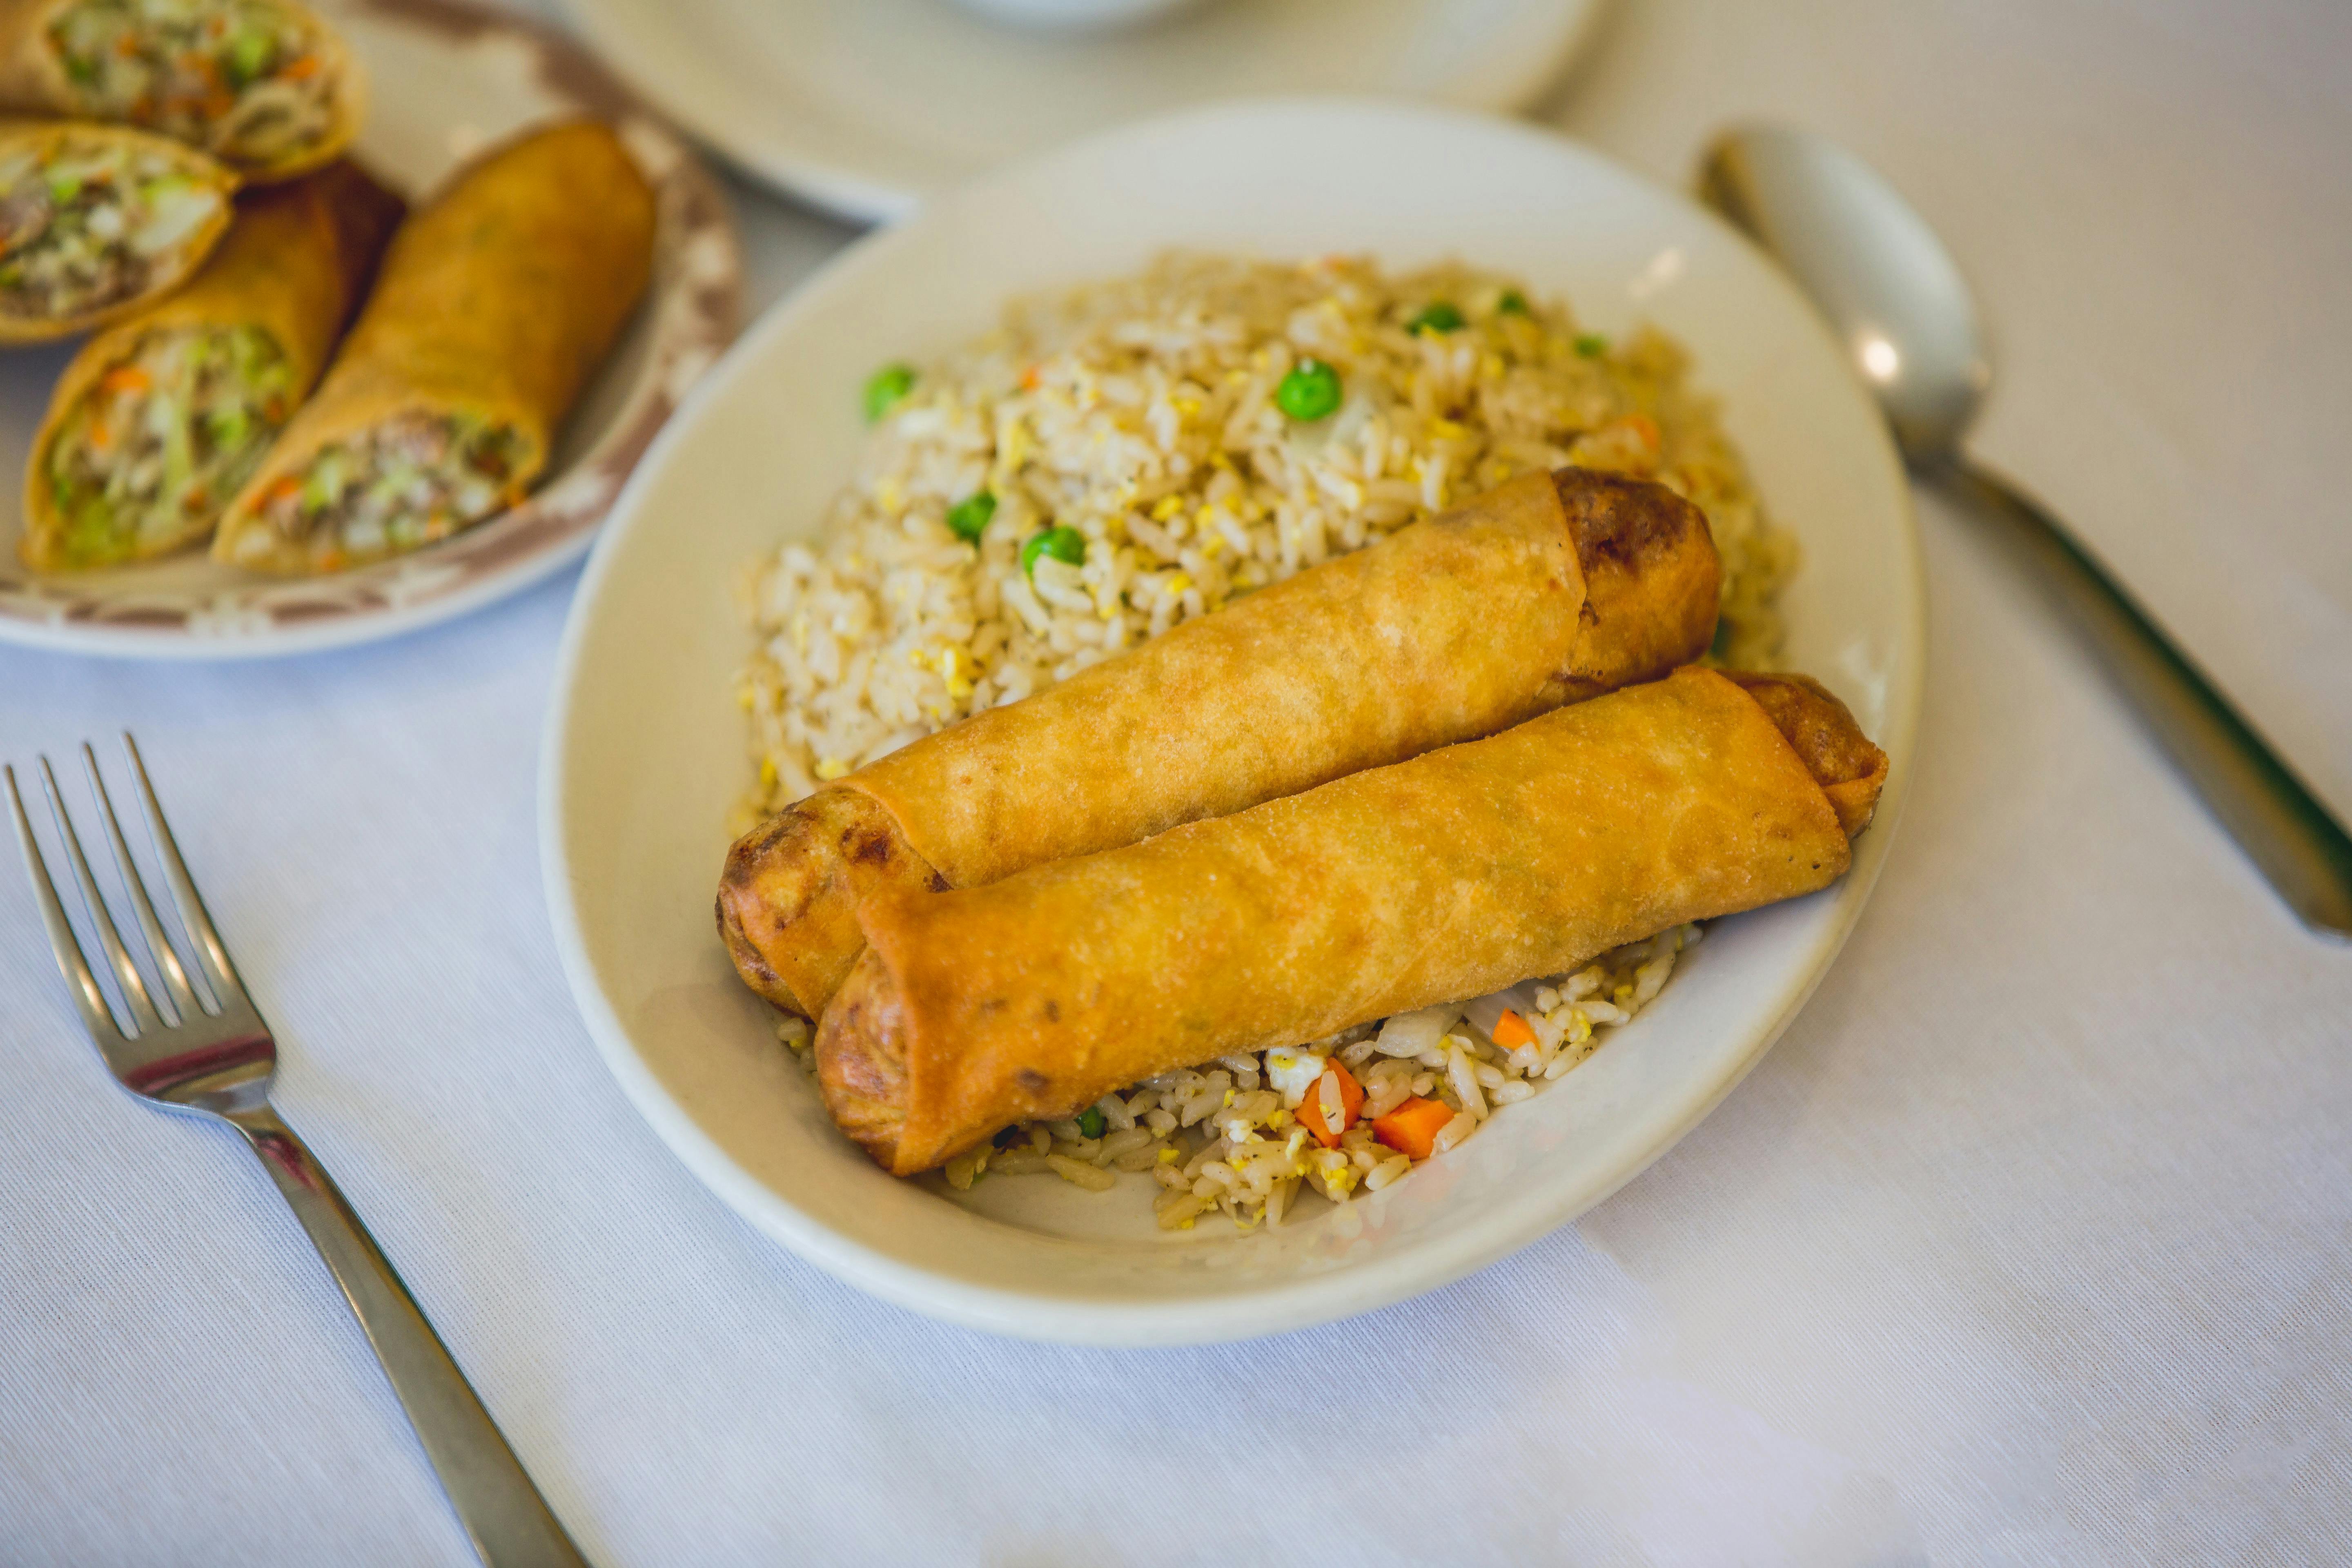 14. Two Egg Rolls with Fried Rice from Hmong's Golden Egg Roll in La Crosse, WI